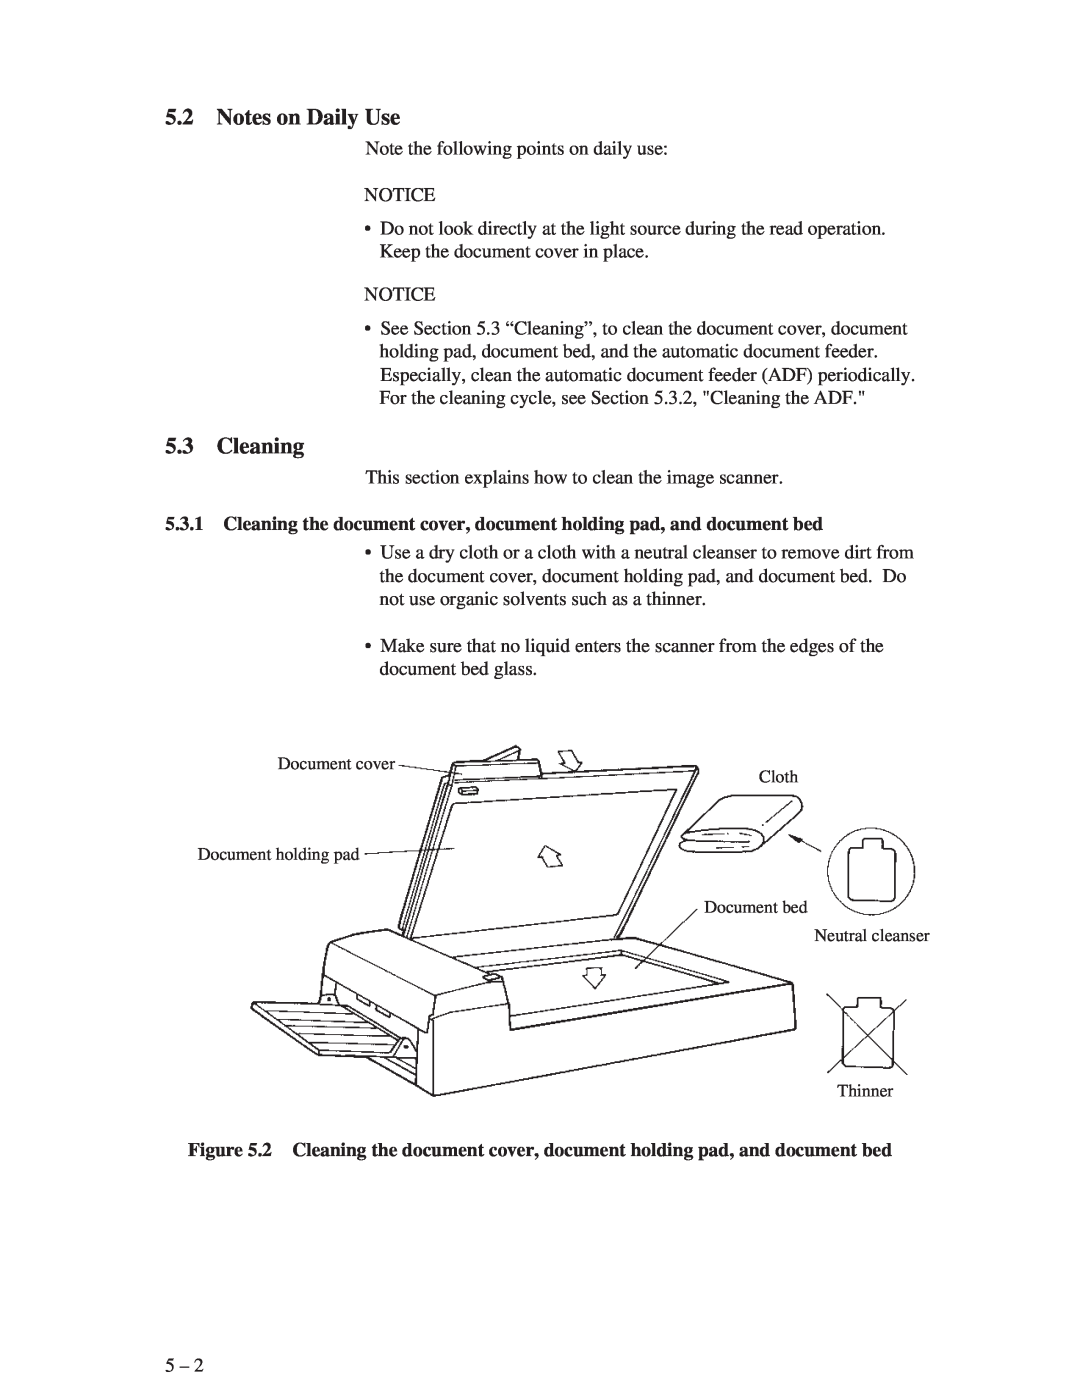 Fujitsu M3093GX, M3093EX manual Notes on Daily Use, Cleaning 